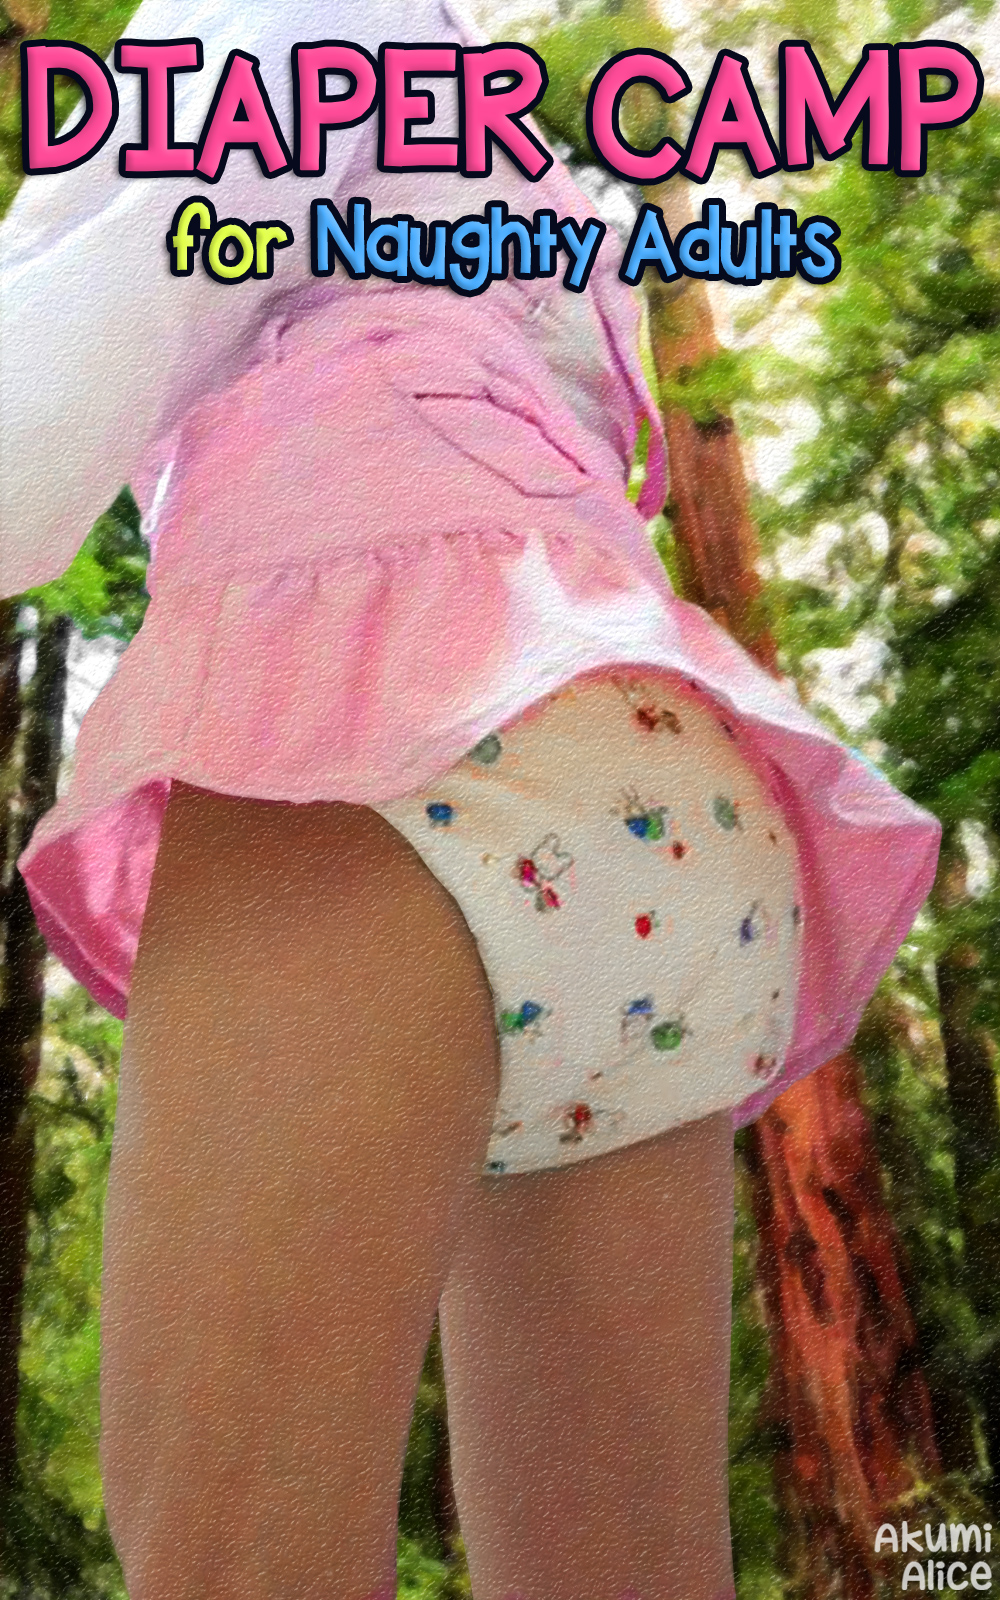 Diaper Camp for Naughty Adults